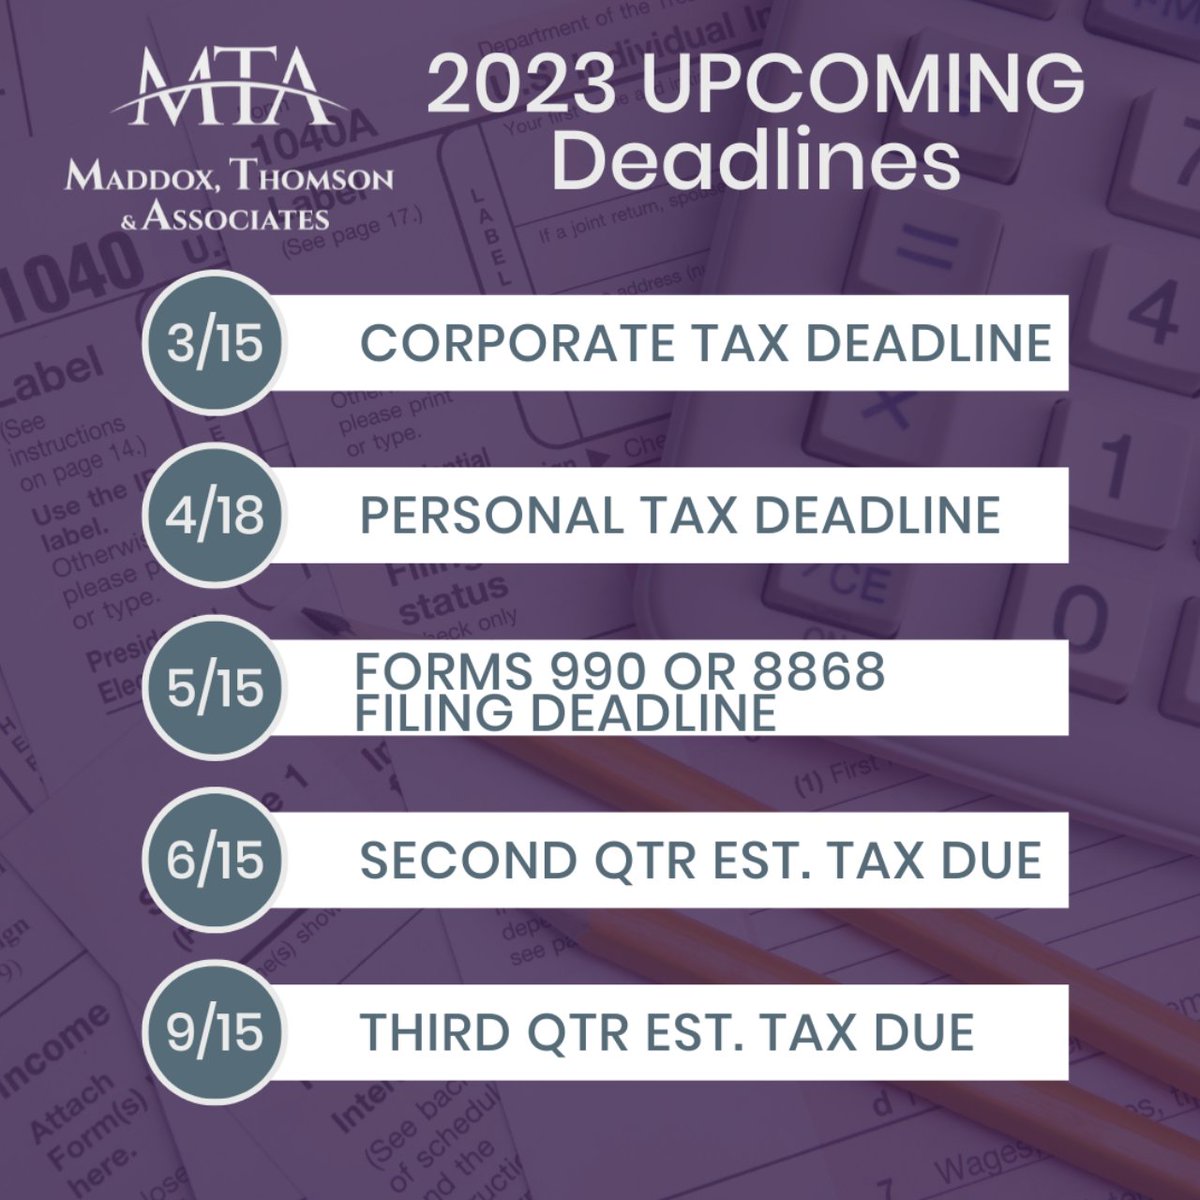 If you are looking for a professional consultation for your #2022taxreturn, reach out to us at buff.ly/3TbGAqY.

#businesstaxes #personaltaxes #corporatetaxdeadline #corporatetaxes #2022taxes #taxdeadline #cpa #accounting #accountant #maddoxthomson